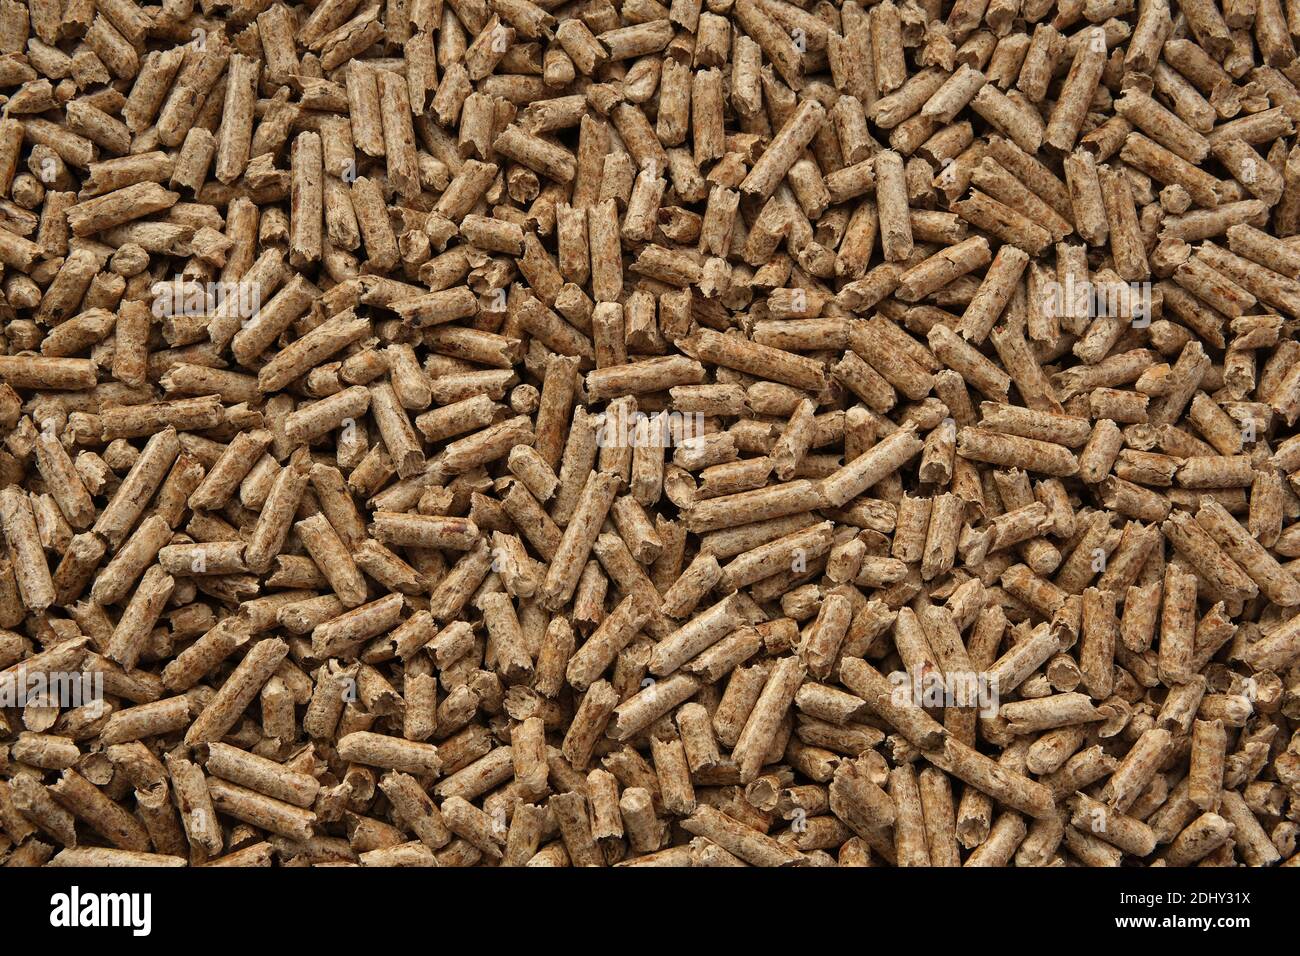 Wood pellets texture. Pellets made from compressed wood and used as natural cat litter. Eco-friendly and biodegradable material. Flat lay image. Stock Photo